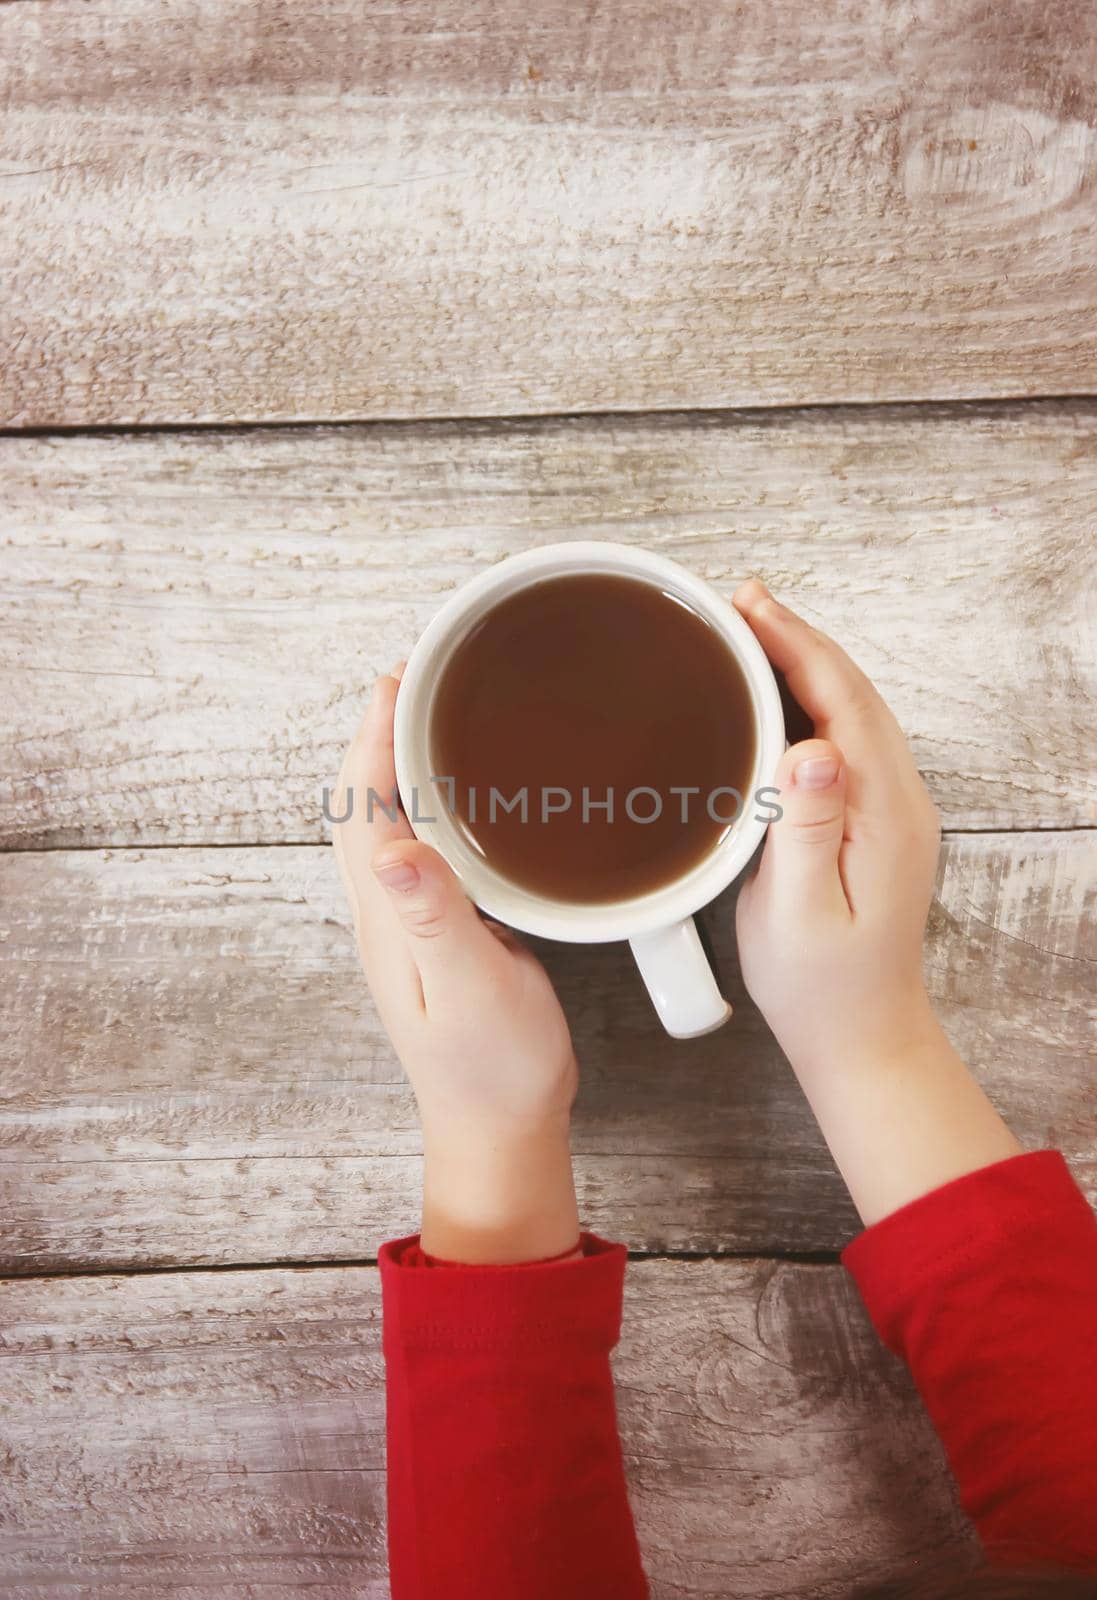 A cup of tea in the hands of a child. Comfort.